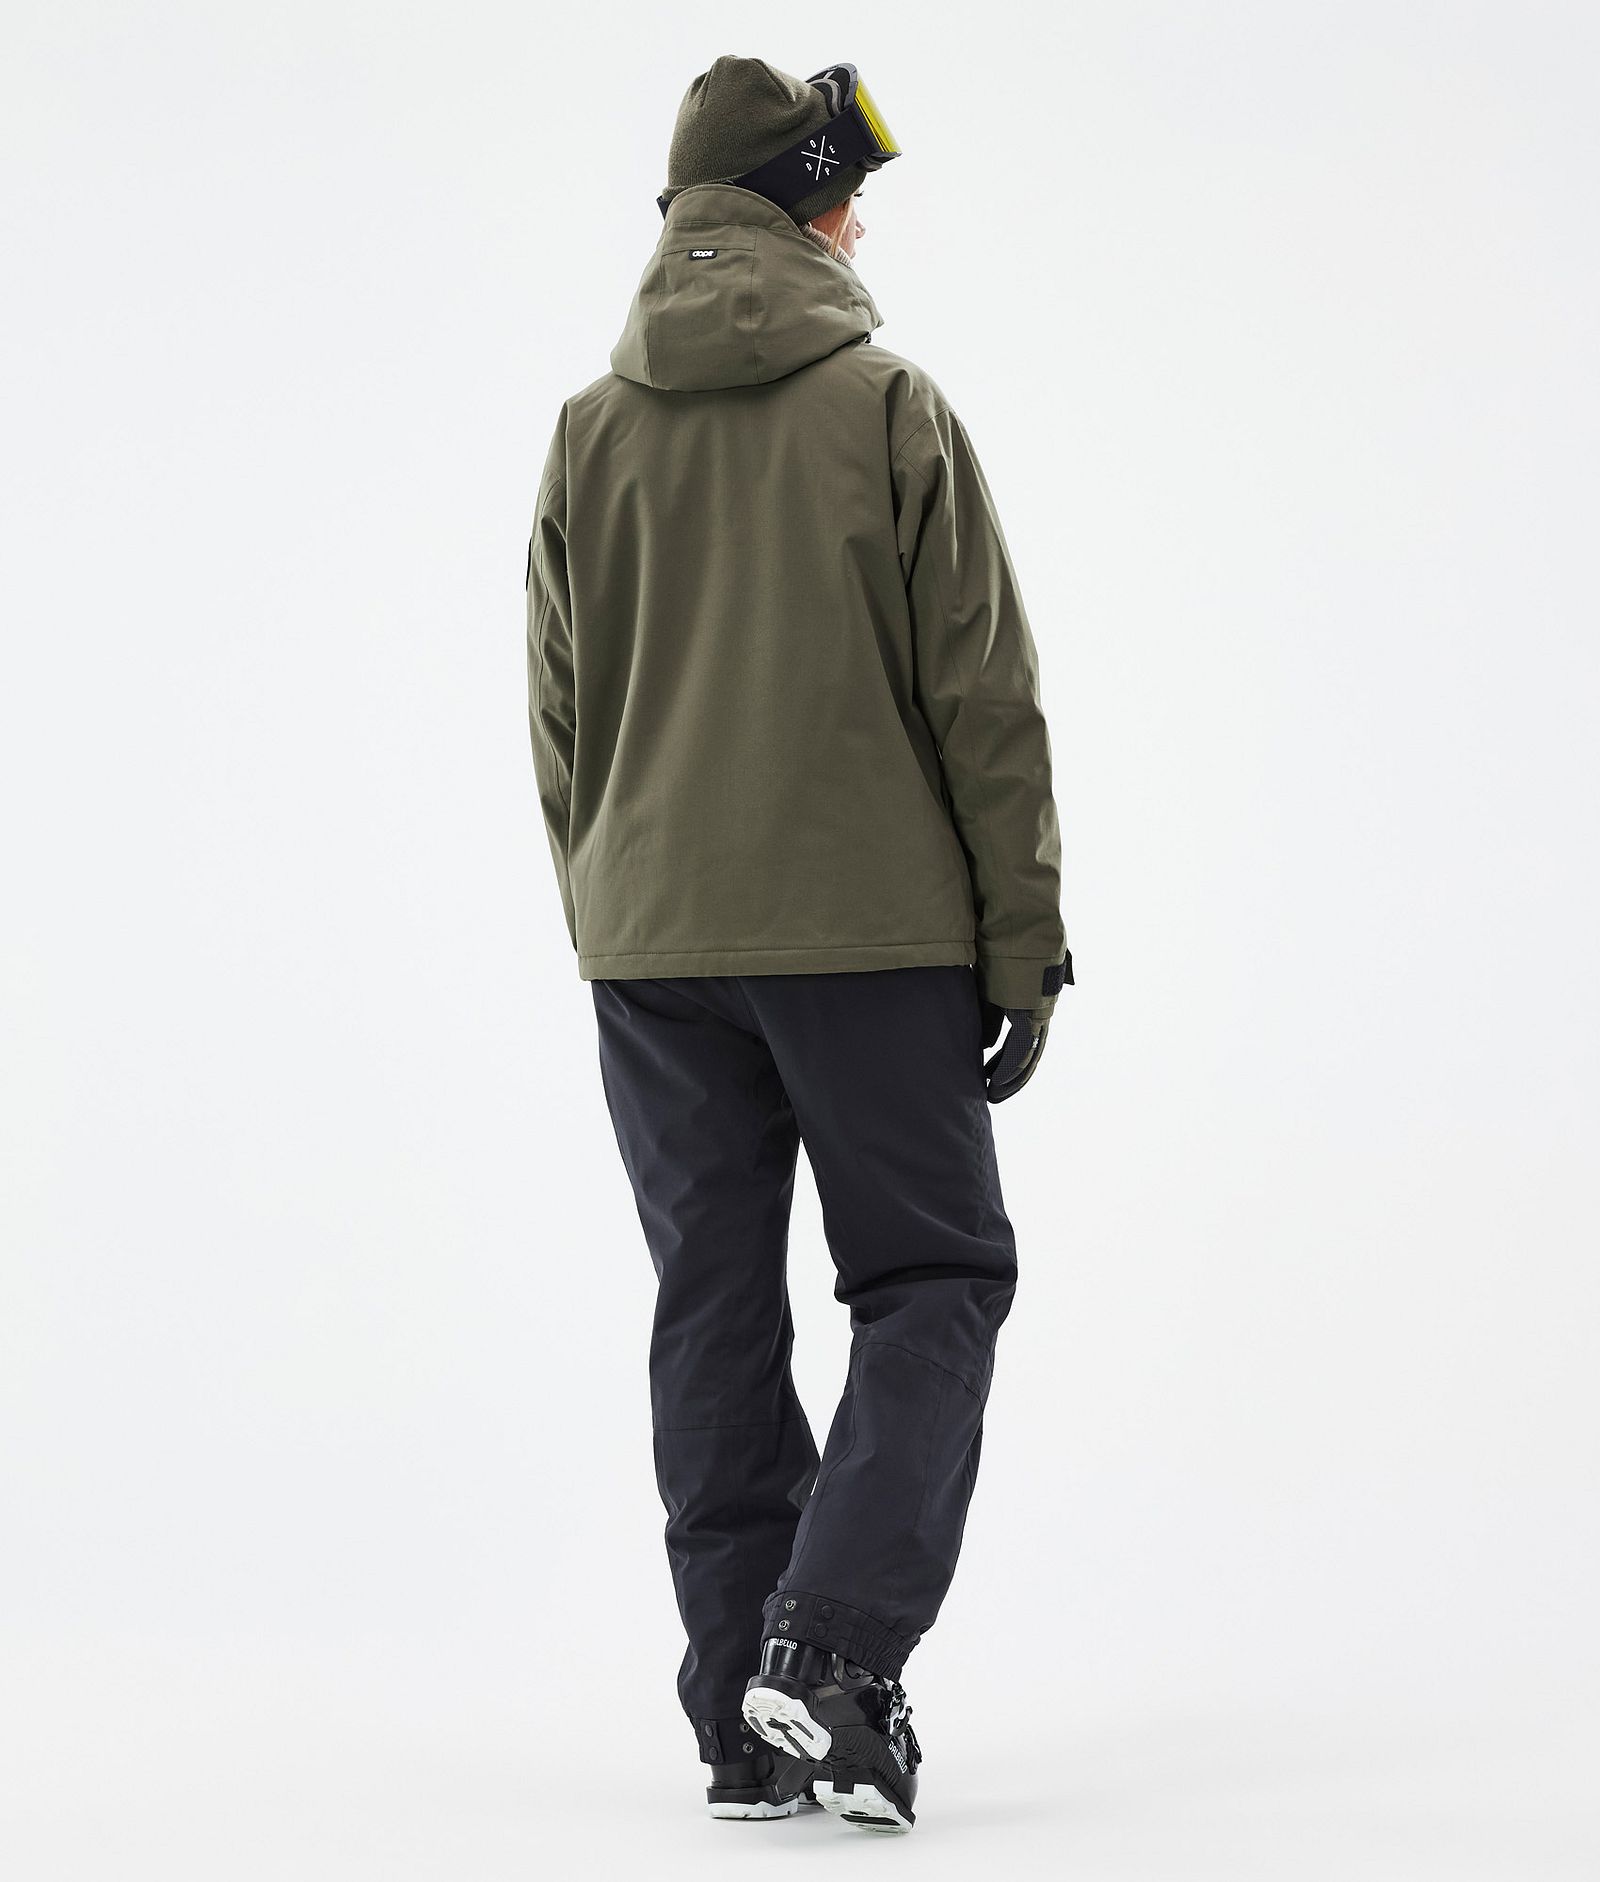 Dope Blizzard W Full Zip Giacca Sci Donna Olive Green